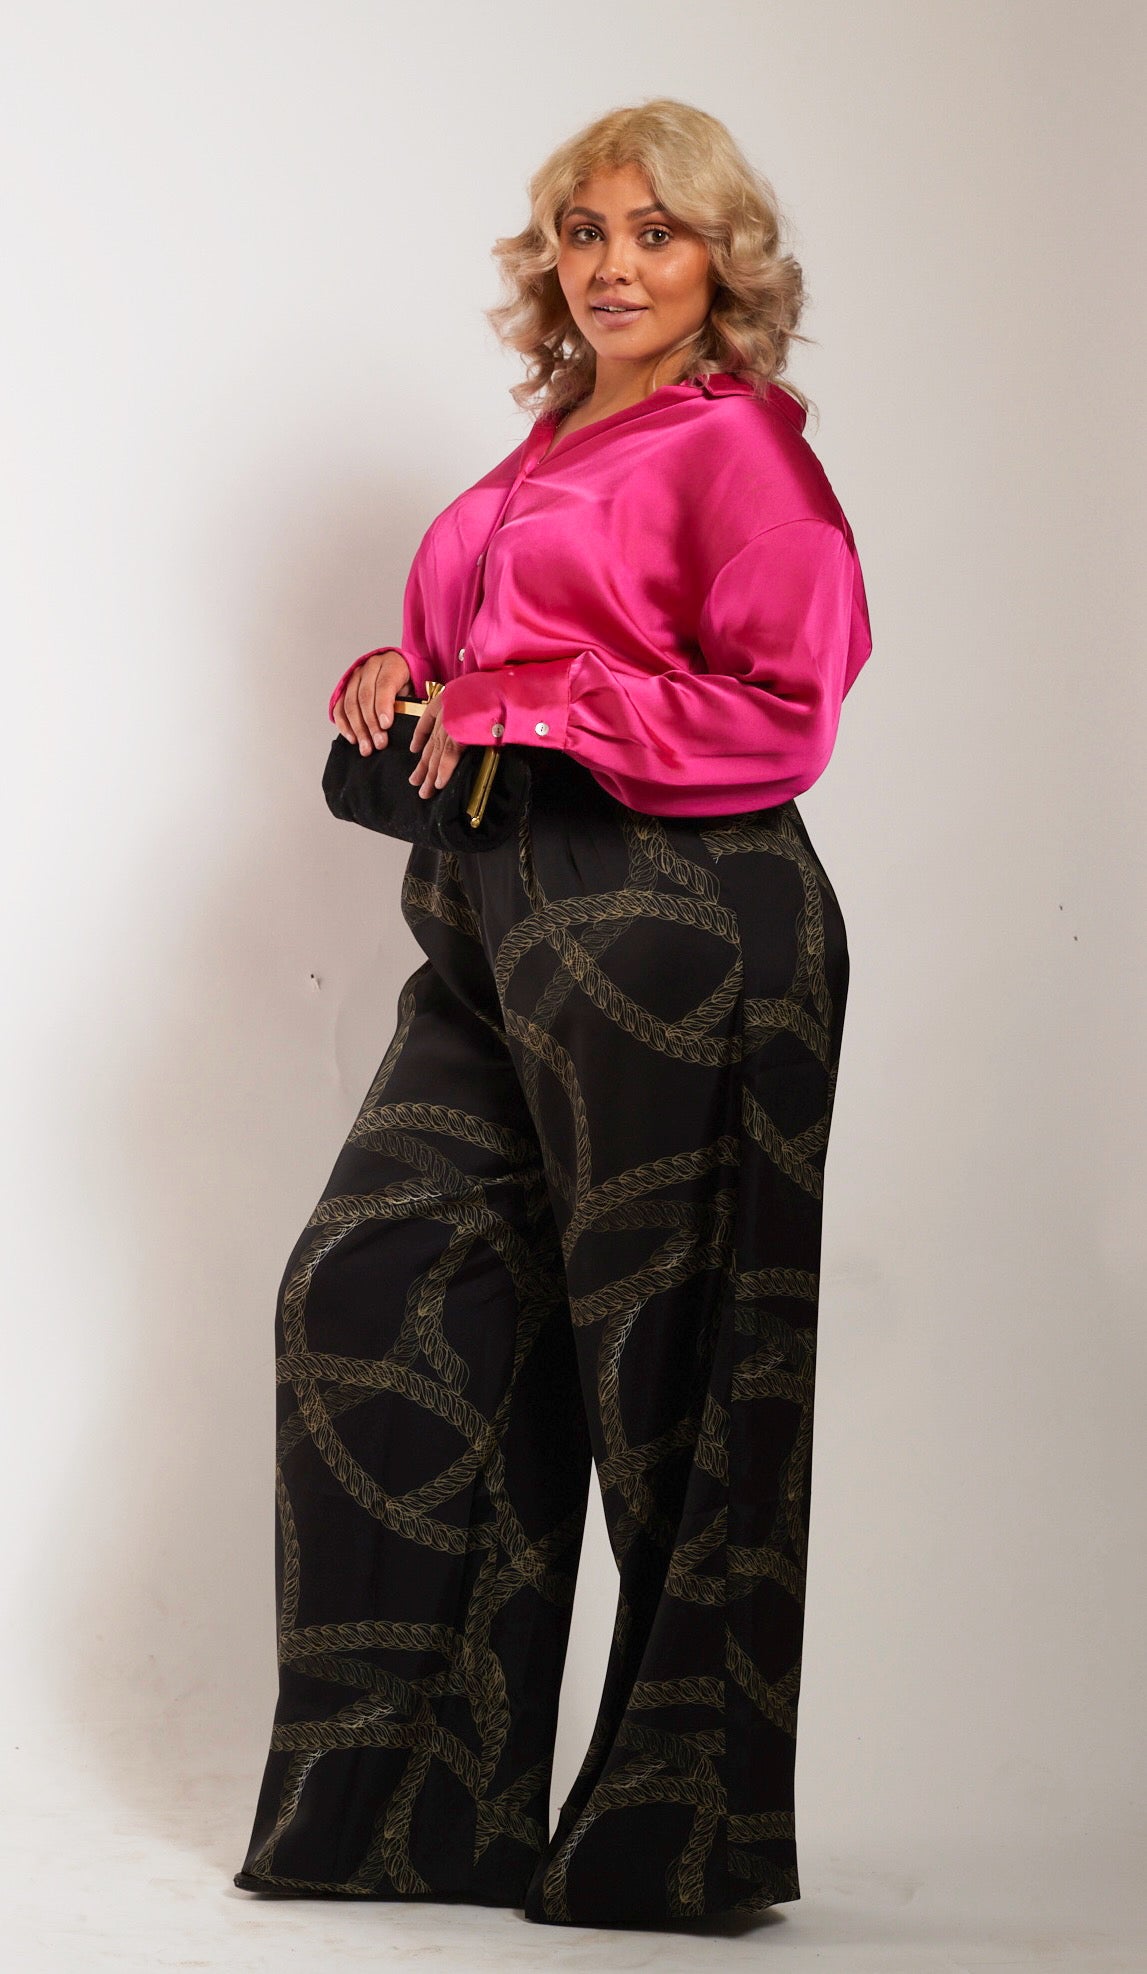 side profile of woman wearing black and gold chain printed yacht slacks and pink blouse